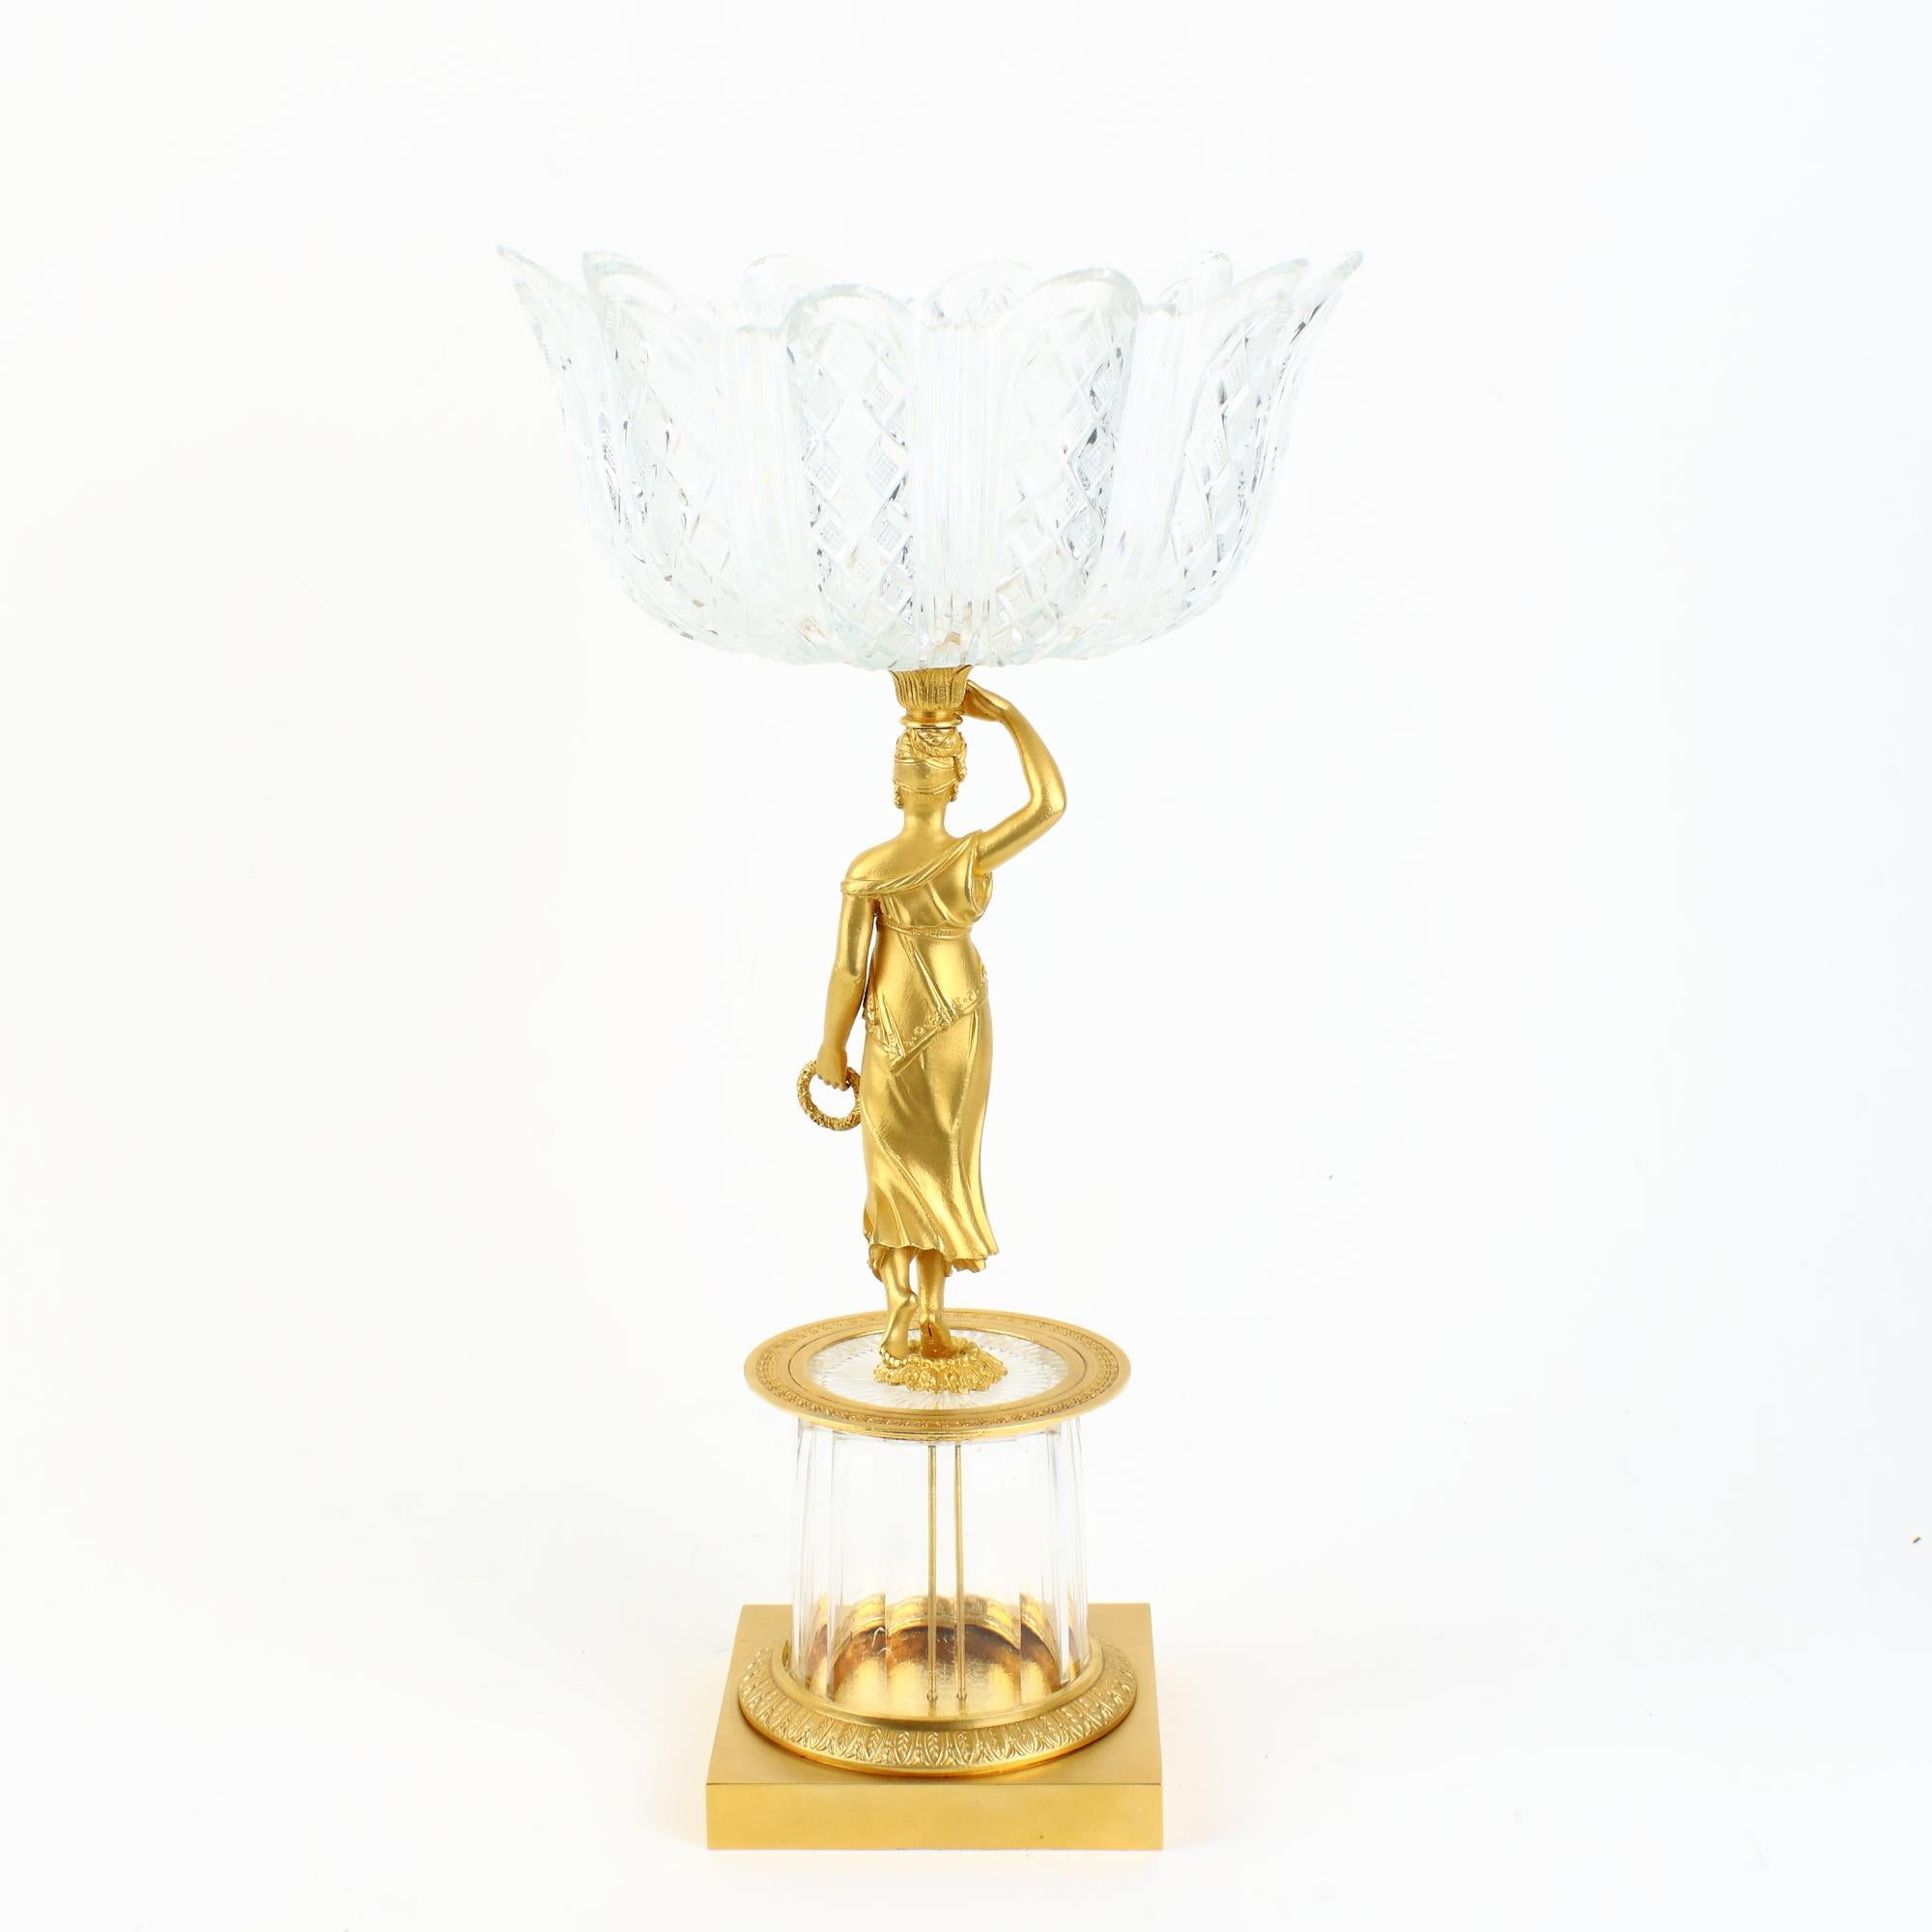 Faceted Early 19th Century French Empire Gilt Bronze and Glass Figural Tazza or Bowl